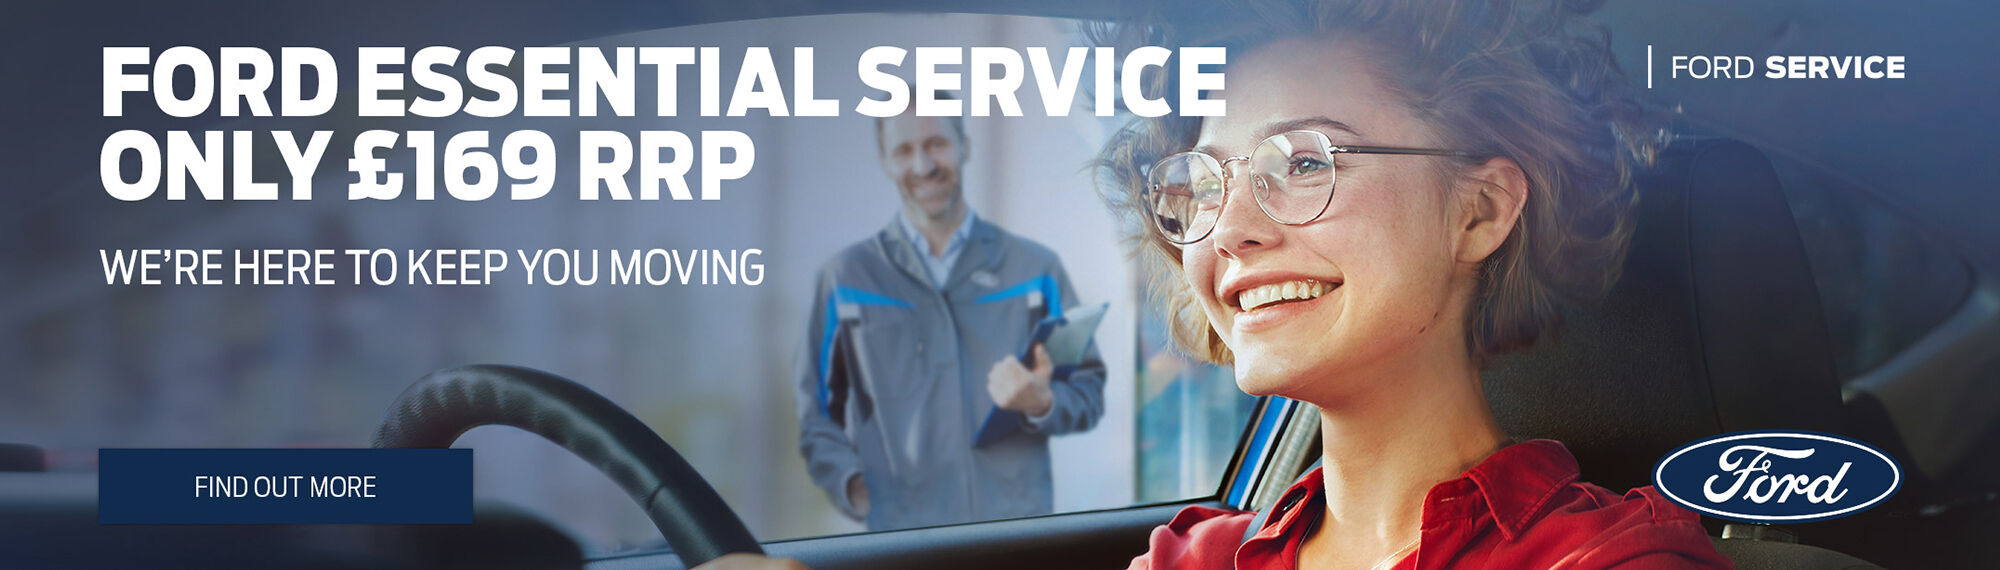 Ford Essential Service Image